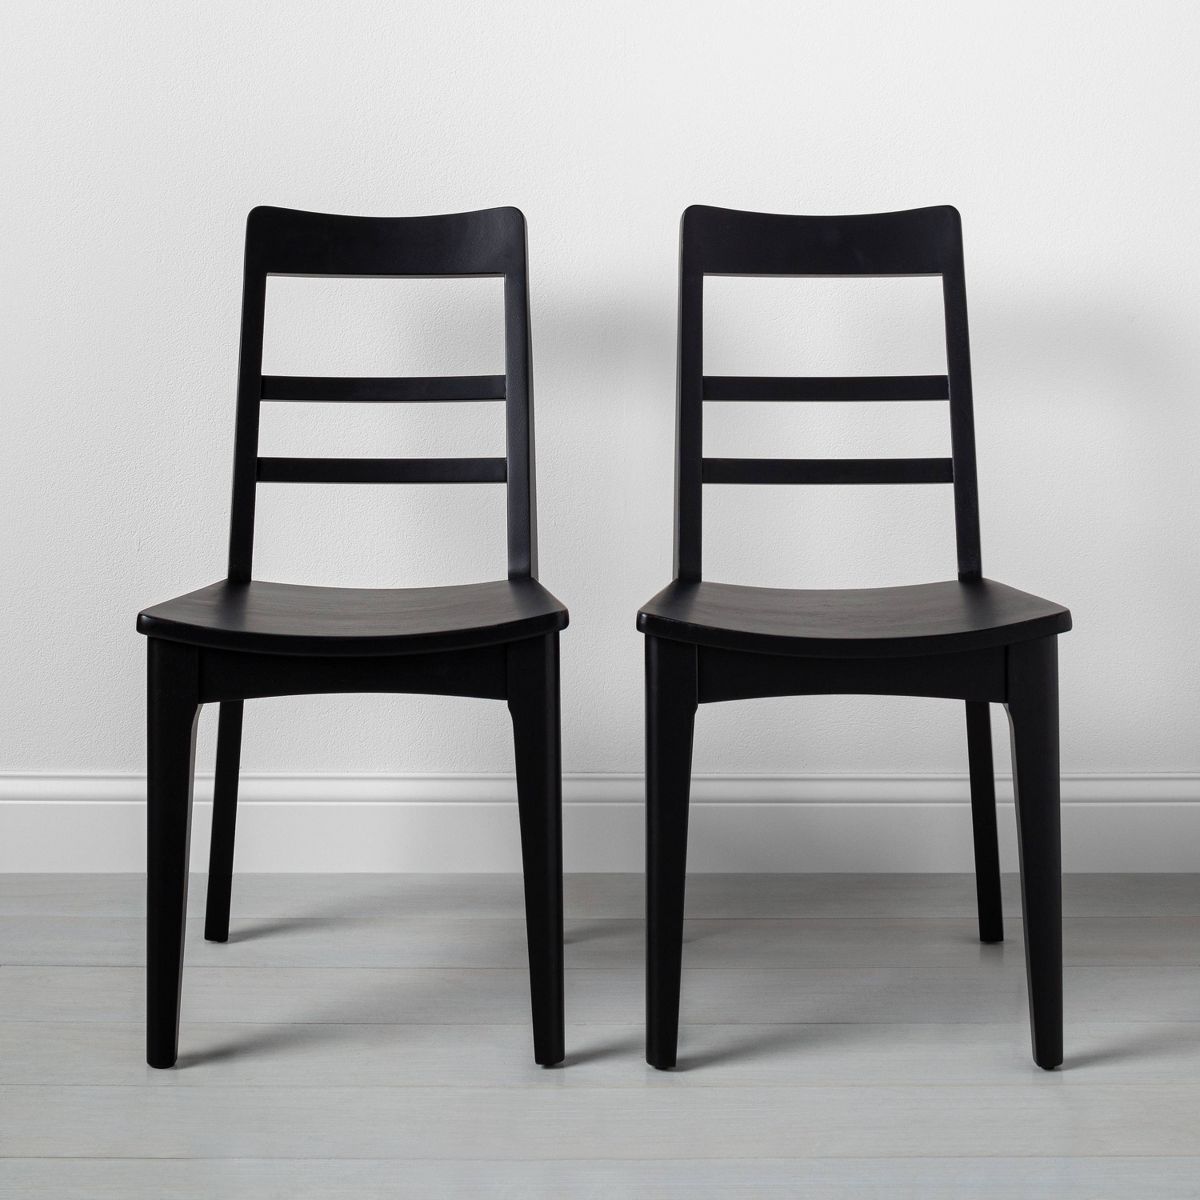 2pk Wood Ladder Back Dining Chair Set - Black - Hearth & Hand™ with Magnolia | Target